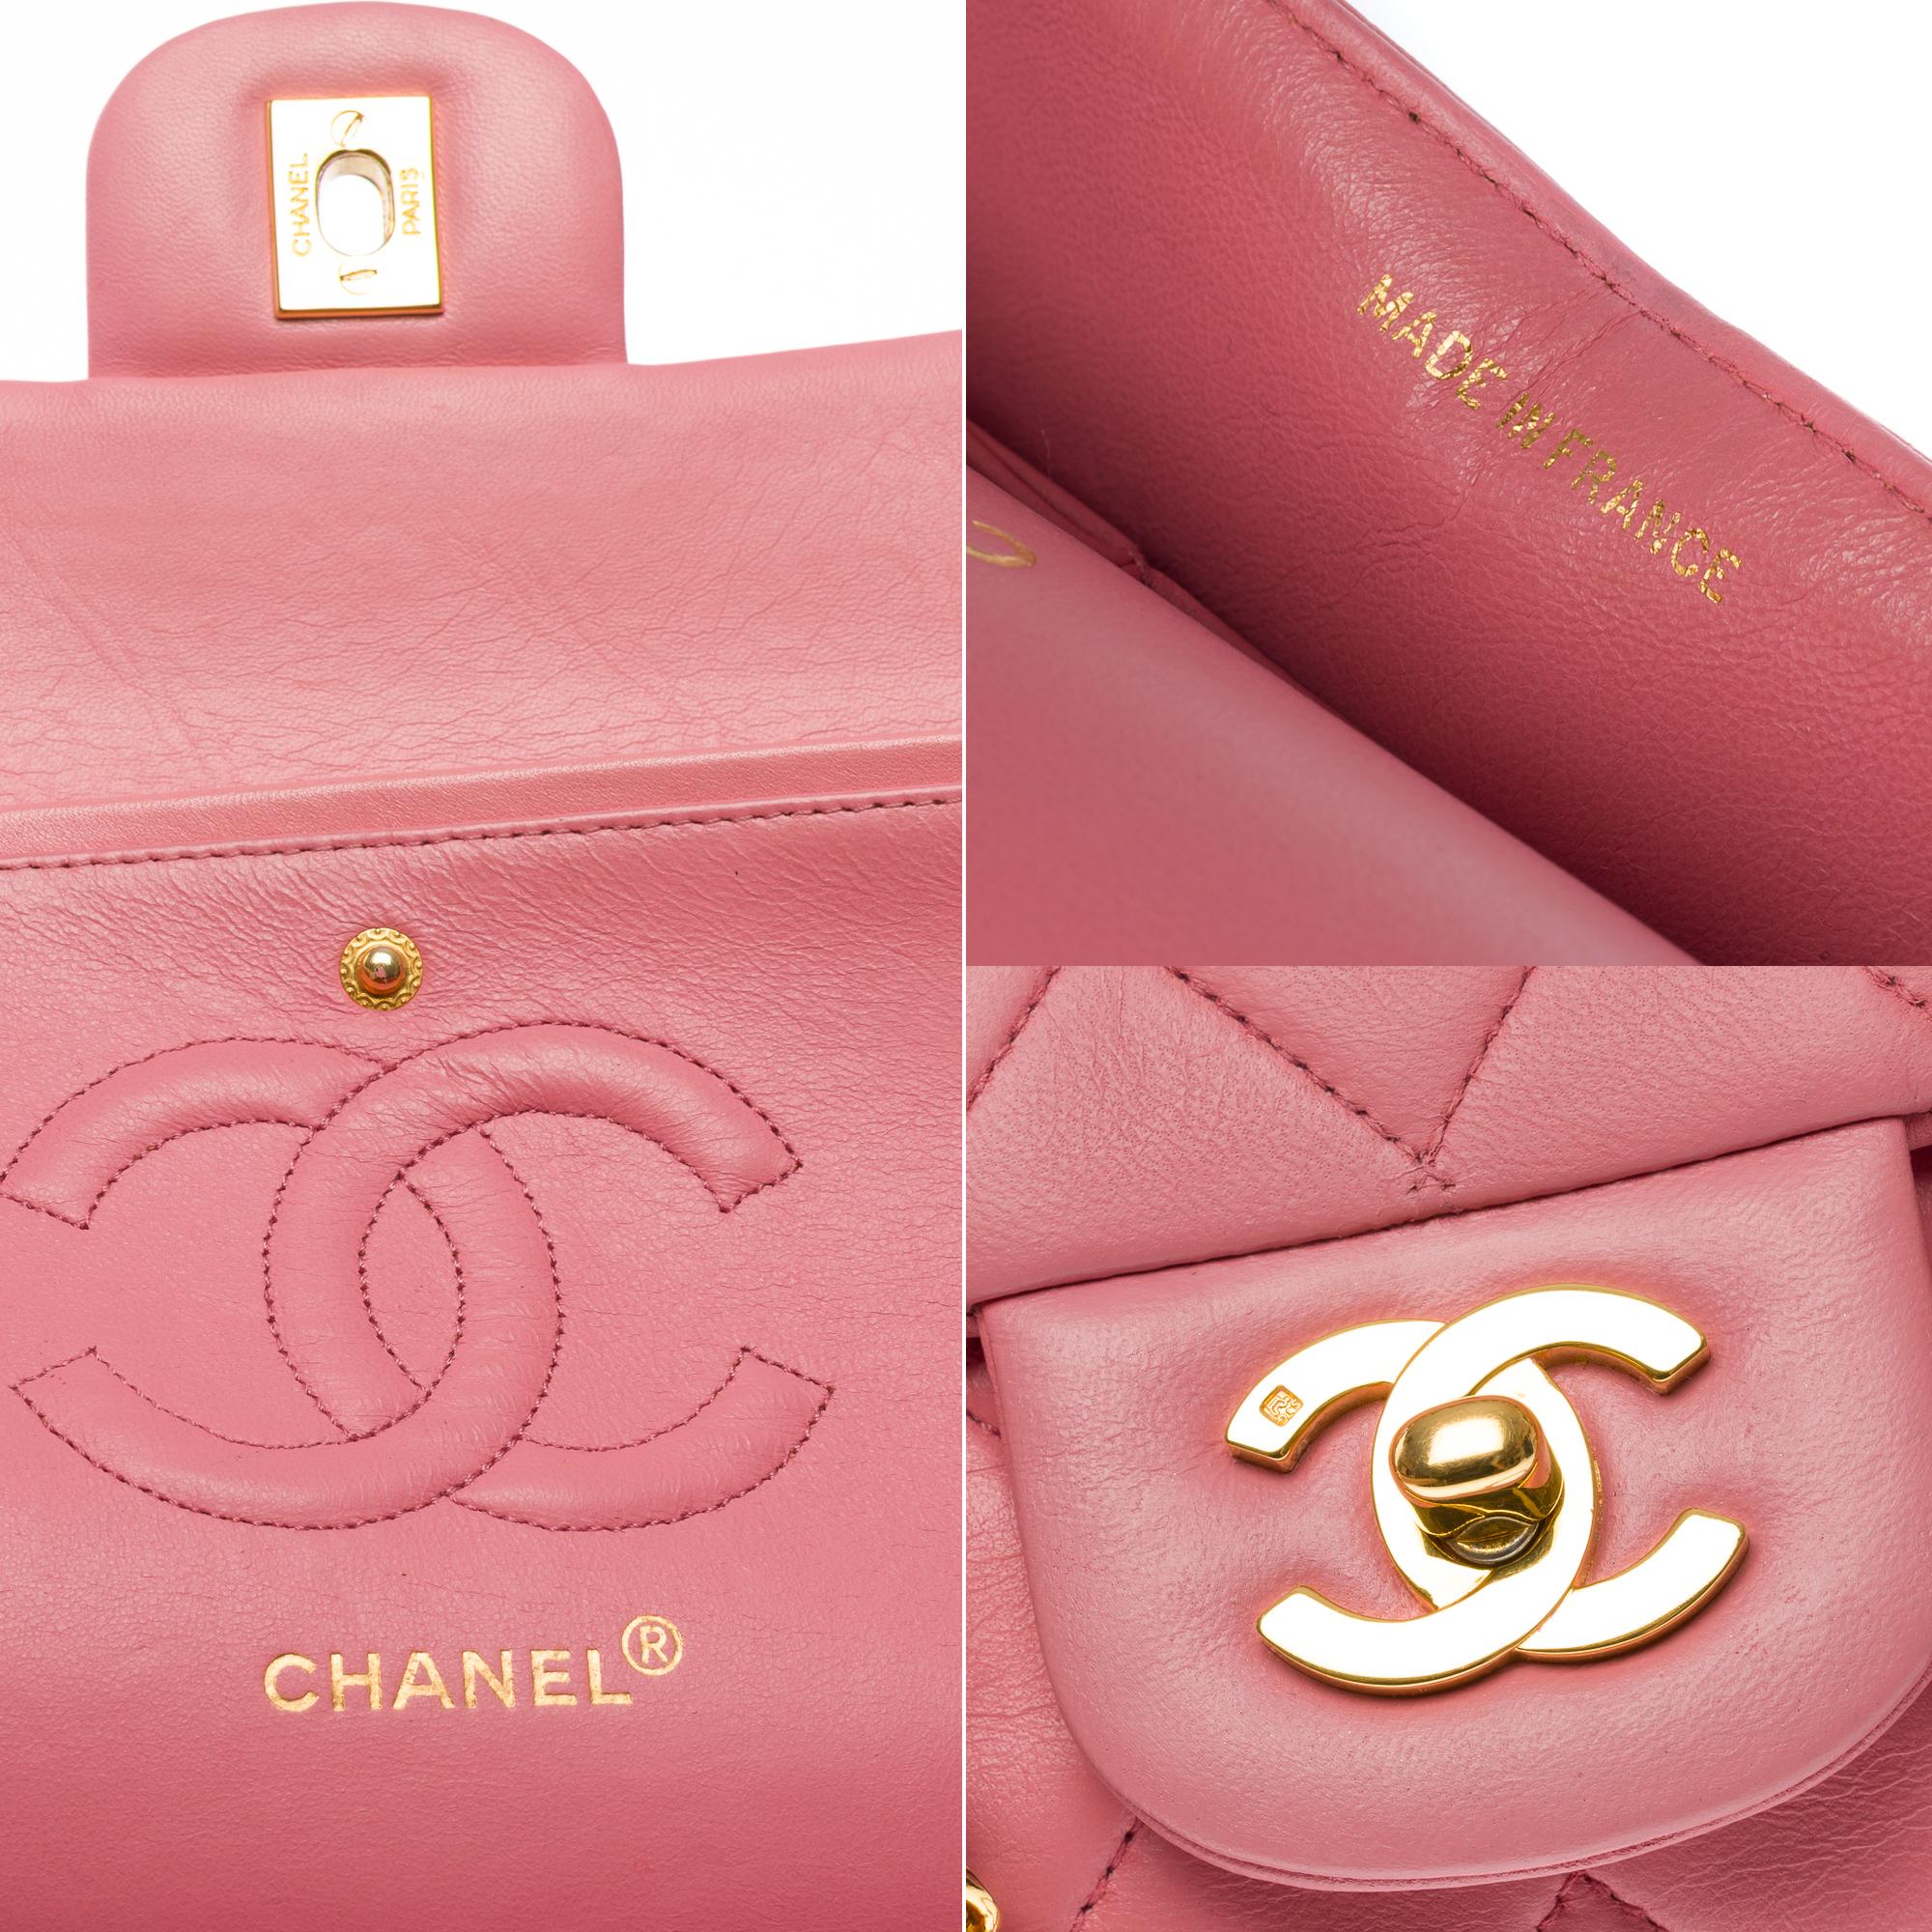 Chanel Timeless Medium double Flap shoulder bag in Pink quilted lambskin, GHW 4